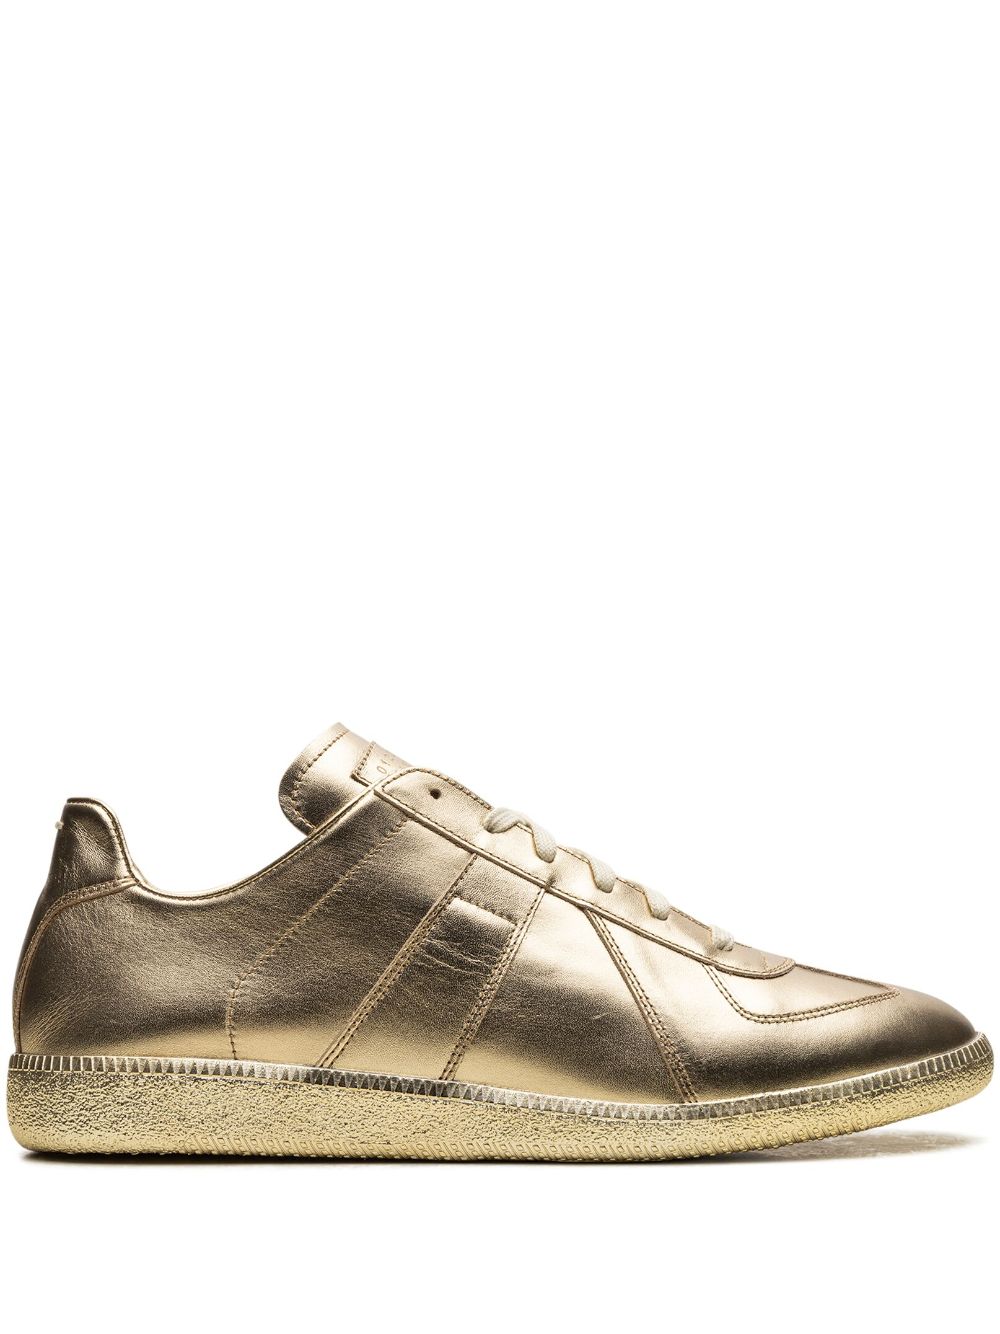 Maison Margiela Replica "Gold Plated" low-top sneakers